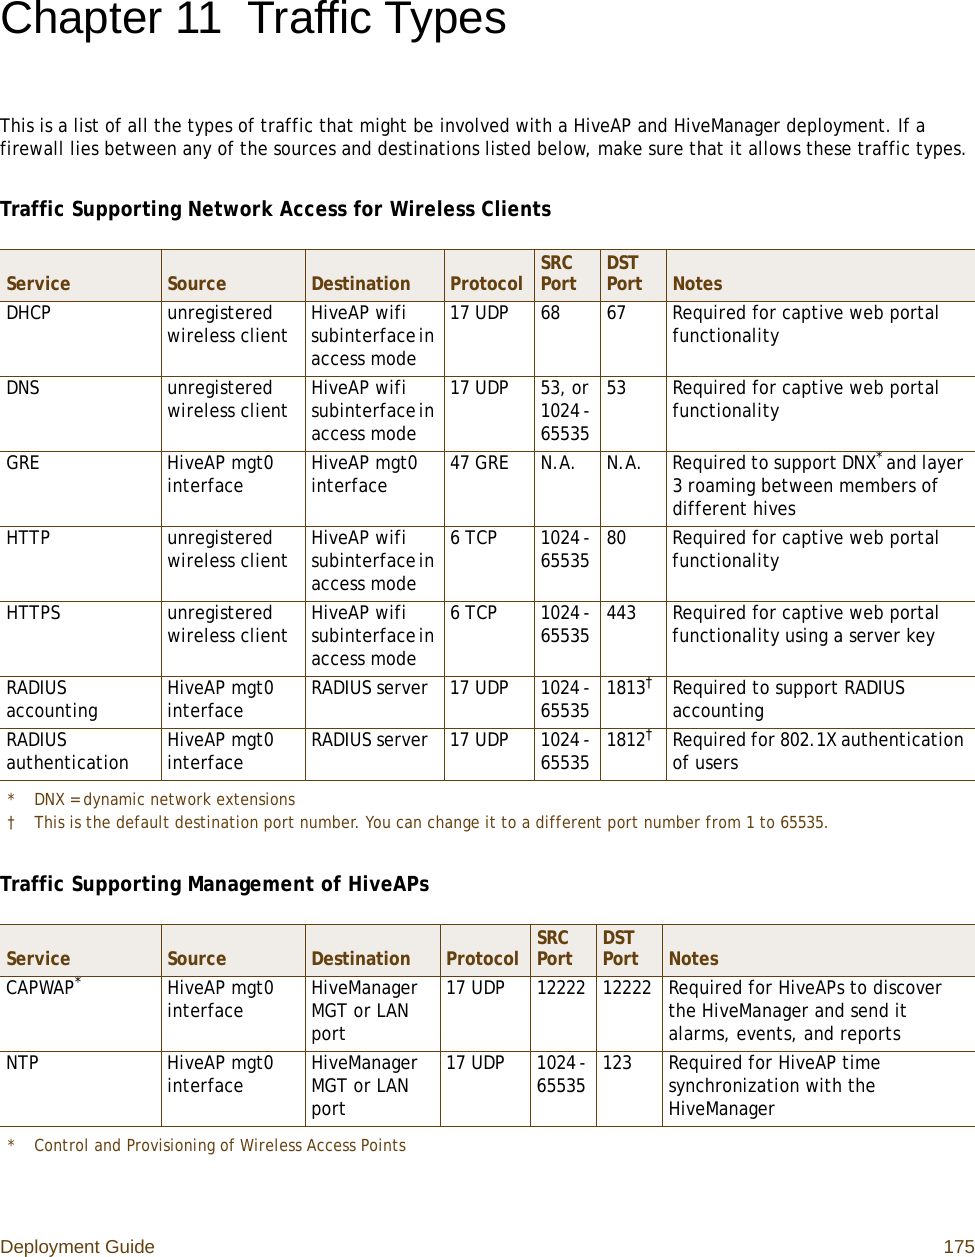 Deployment Guide 175Chapter 11 Traffic TypesThis is a list of all the types of traffic that might be involved with a HiveAP and HiveManager deployment. If a firewall lies between any of the sources and destinations listed below, make sure that it allows these traffic types.Traffic Supporting Network Access for Wireless ClientsTraffic Supporting Management of HiveAPsService Source Destination Protocol SRC Port DST Port NotesDHCP unregistered wireless client HiveAP wifi subinterface in access mode17 UDP6867Required for captive web portal functionalityDNS unregistered wireless client HiveAP wifi subinterface in access mode17 UDP 53, or 1024 - 6553553 Required for captive web portal functionalityGRE HiveAP mgt0 interface HiveAP mgt0 interface 47 GRE N.A. N.A. Required to support DNX* and layer 3 roaming between members of different hives* DNX = dynamic network extensionsHTTP unregistered wireless client HiveAP wifi subinterface in access mode6 TCP 1024 - 65535 80 Required for captive web portal functionalityHTTPS unregistered wireless client HiveAP wifi subinterface in access mode6 TCP 1024 - 65535 443 Required for captive web portal functionality using a server keyRADIUS accounting HiveAP mgt0 interface RADIUS server 17 UDP 1024 - 65535 1813†Required to support RADIUS accountingRADIUS authentication HiveAP mgt0 interface RADIUS server 17 UDP 1024 - 65535 1812†† This is the default destination port number. You can change it to a different port number from 1 to 65535.Required for 802.1X authentication of users Service Source Destination Protocol SRC Port DST Port NotesCAPWAP** Control and Provisioning of Wireless Access PointsHiveAP mgt0 interface HiveManager MGT or LAN port17 UDP 12222 12222 Required for HiveAPs to discover the HiveManager and send it alarms, events, and reportsNTP HiveAP mgt0 interface HiveManager MGT or LAN port17 UDP 1024 - 65535 123 Required for HiveAP time synchronization with the HiveManager